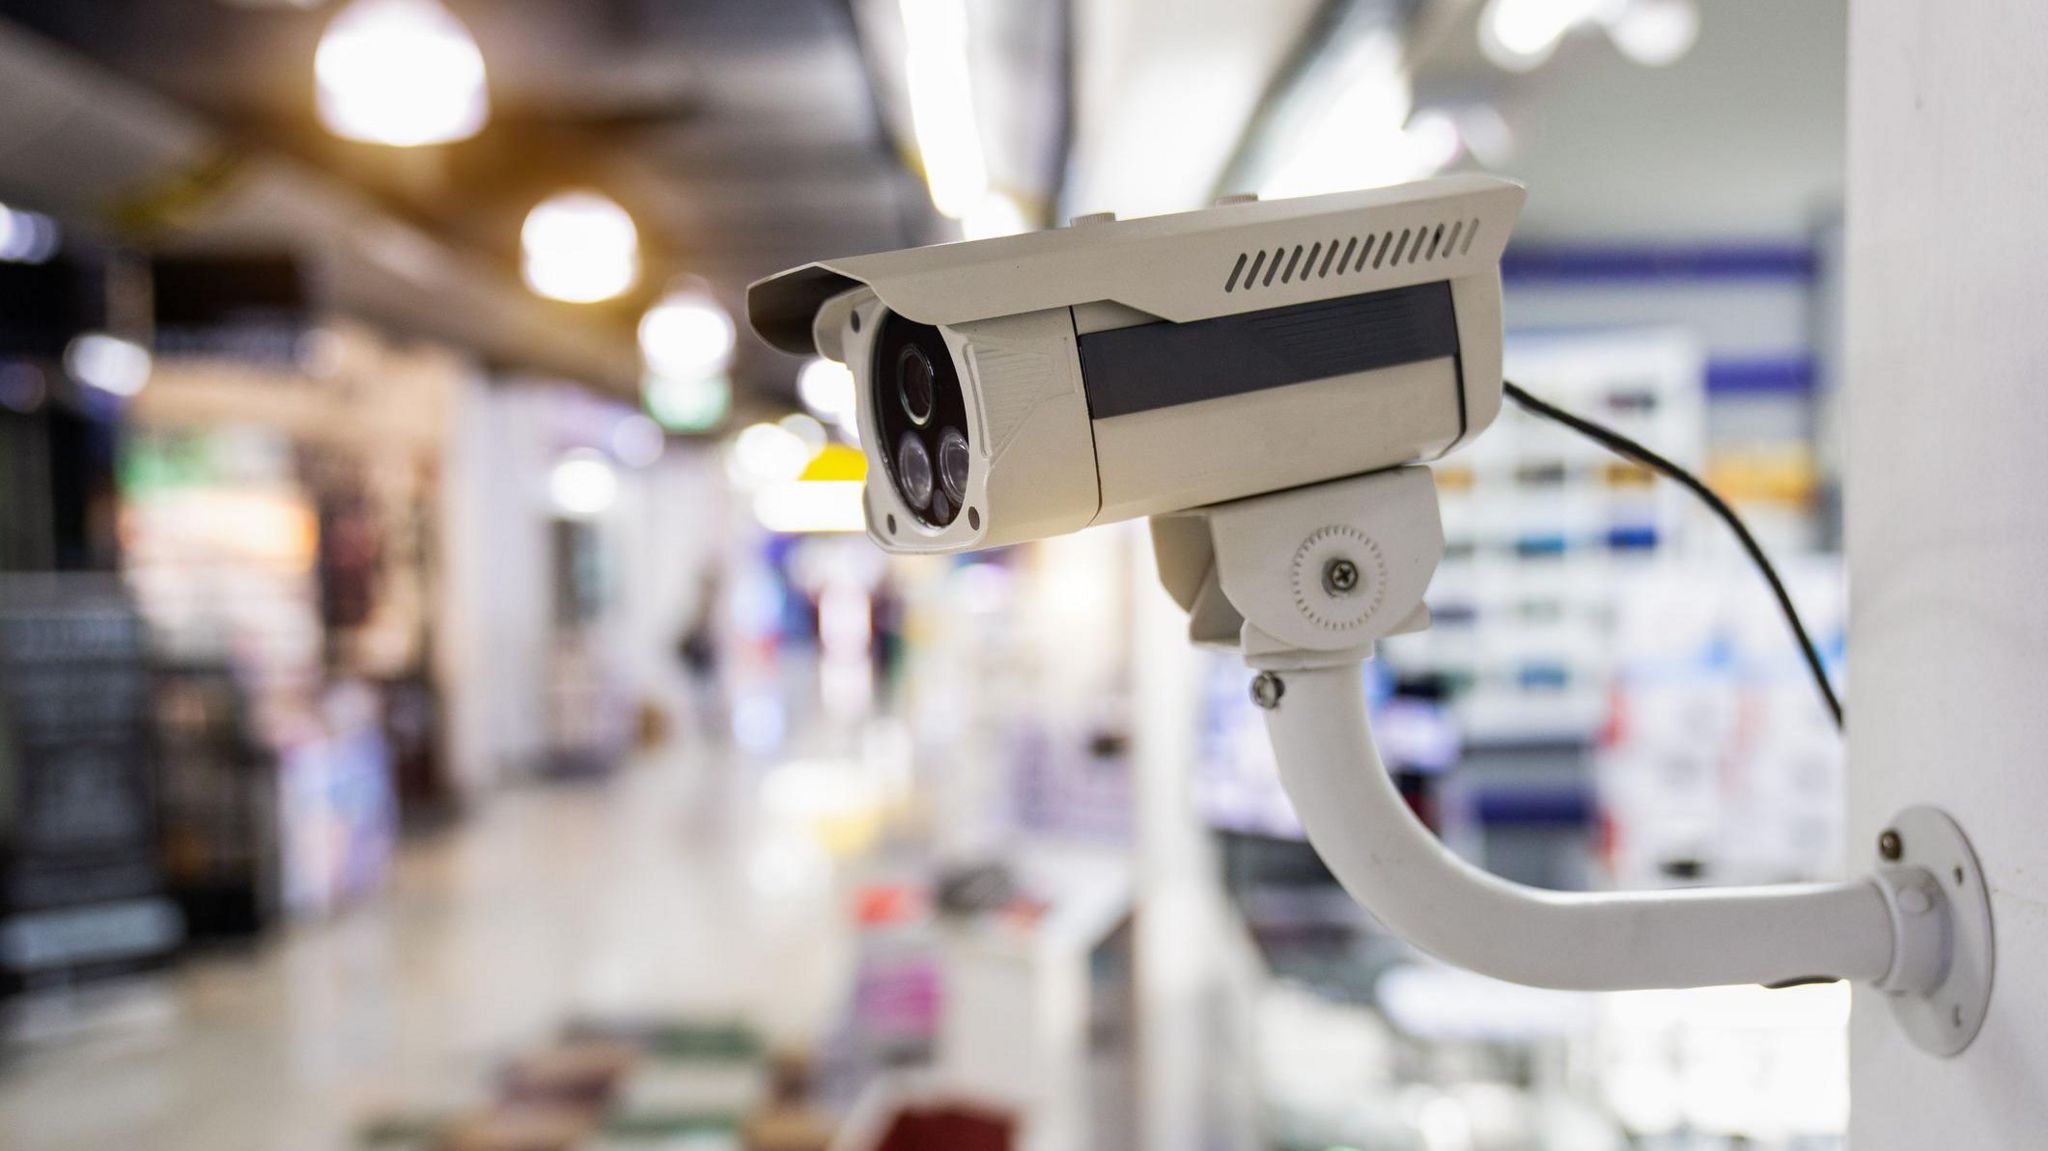 CCTV camera in the foreground with a blurred shopping centre seen in the background